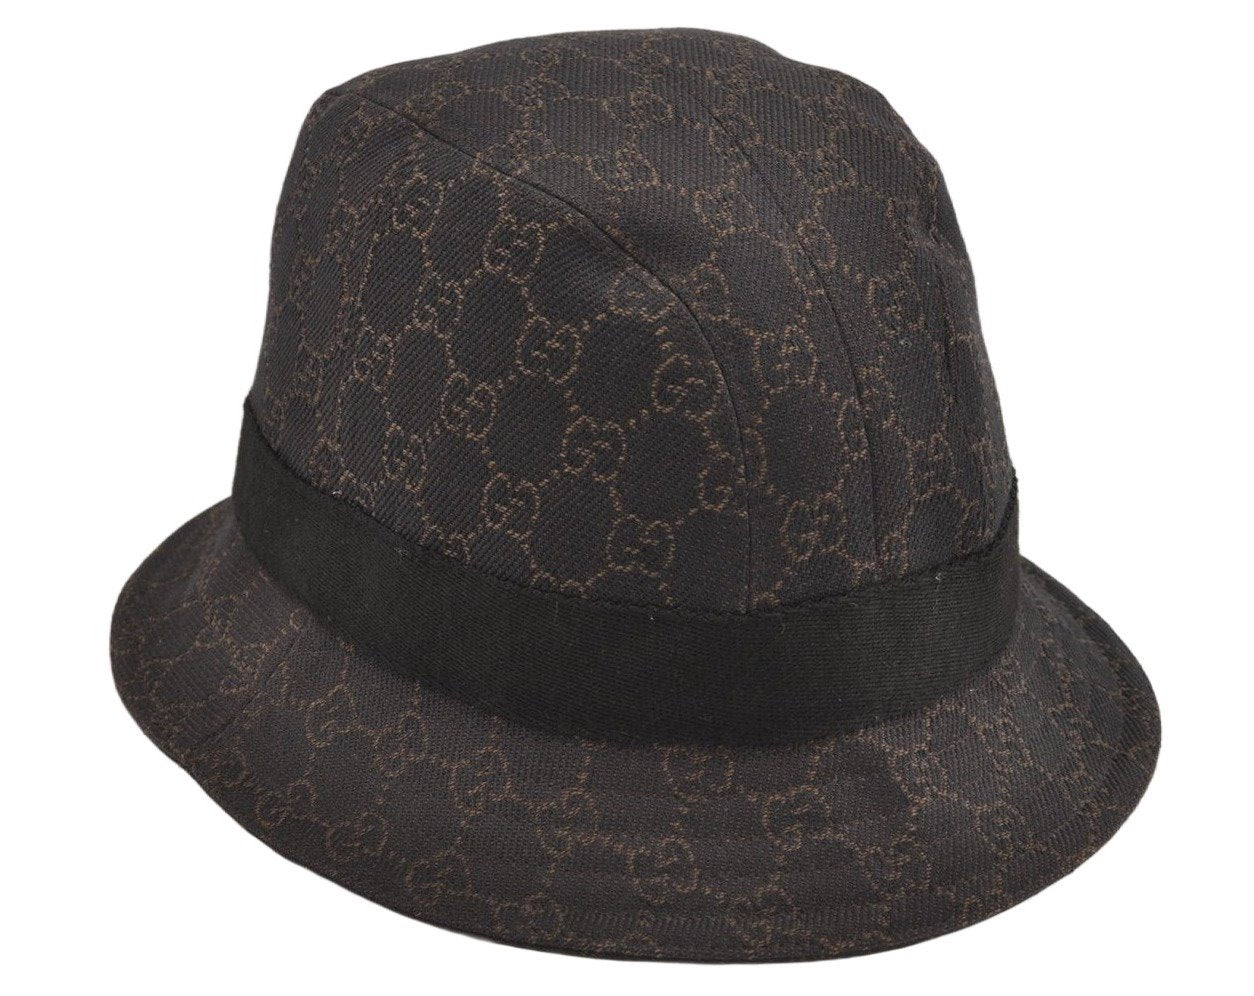 Authentic GUCCI Vintage Bucket Hat GG Canvas Leather Size L Brown 0062K